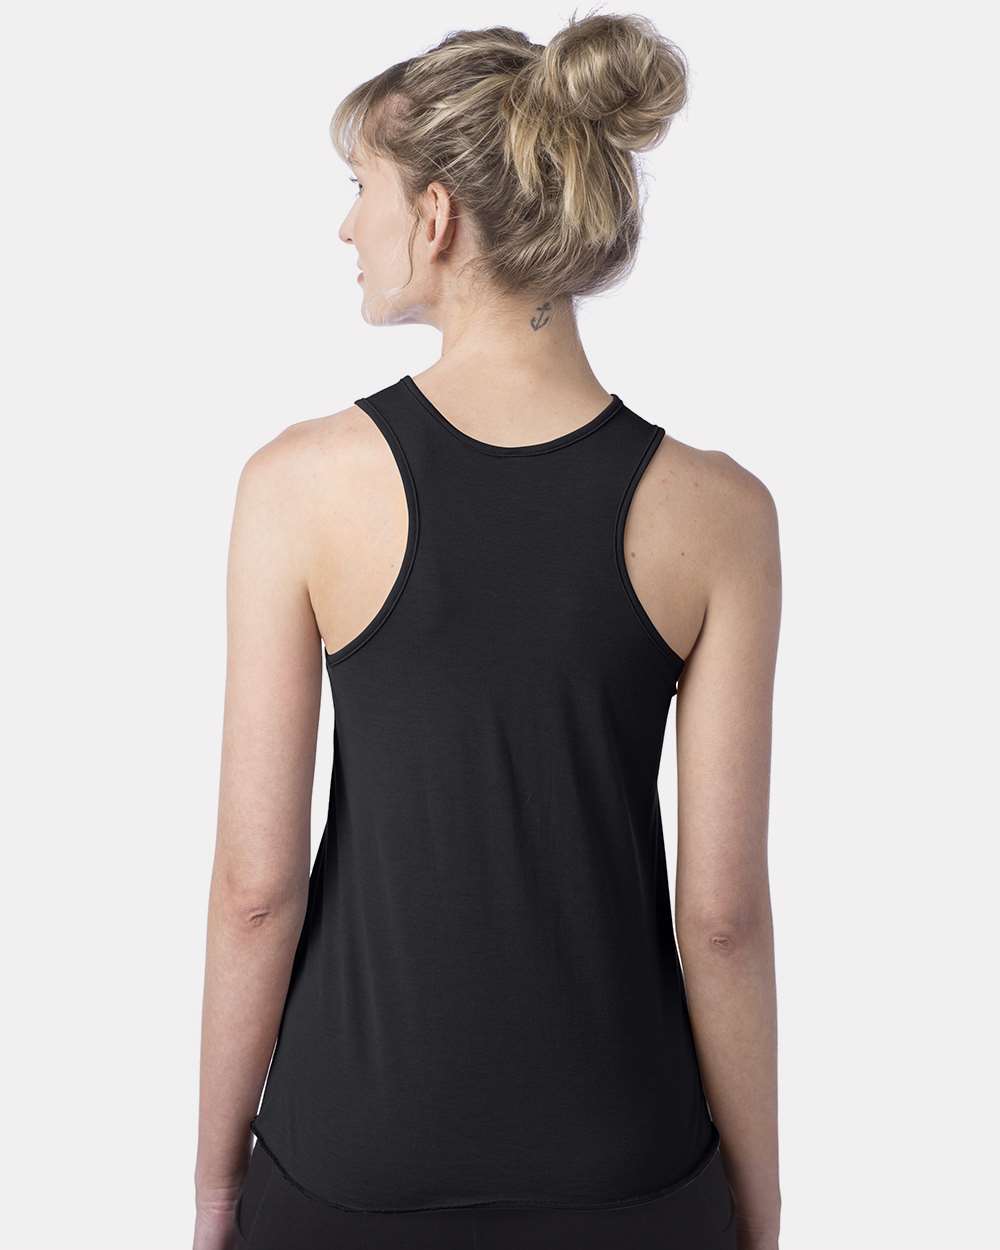 SALE: Homeplate Logo Tank (Adult XS)